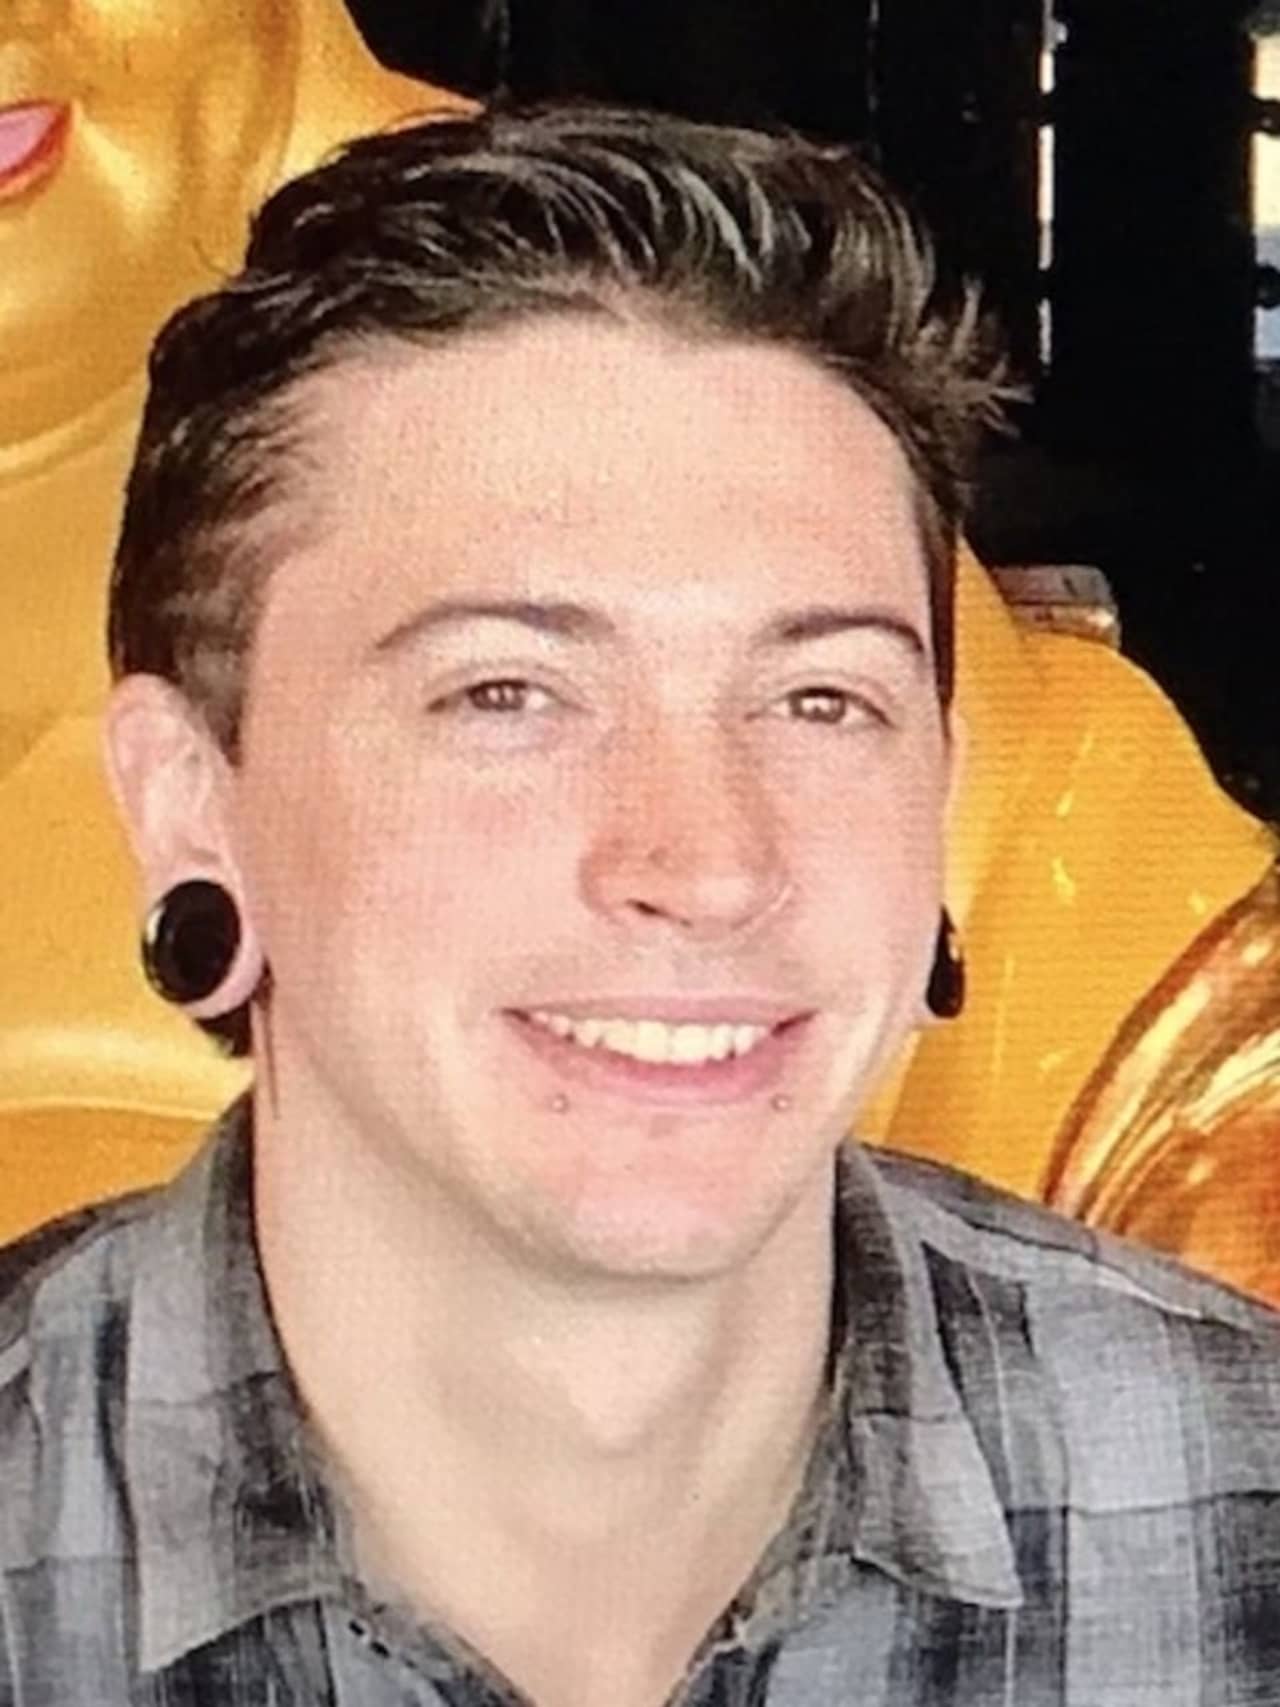 Connor Briodsky-Skidmore, age 28, of East Meadow, was last seen by friends at a bar in the Seaford area at 2:45 a.m. on Friday, July 23, police said.